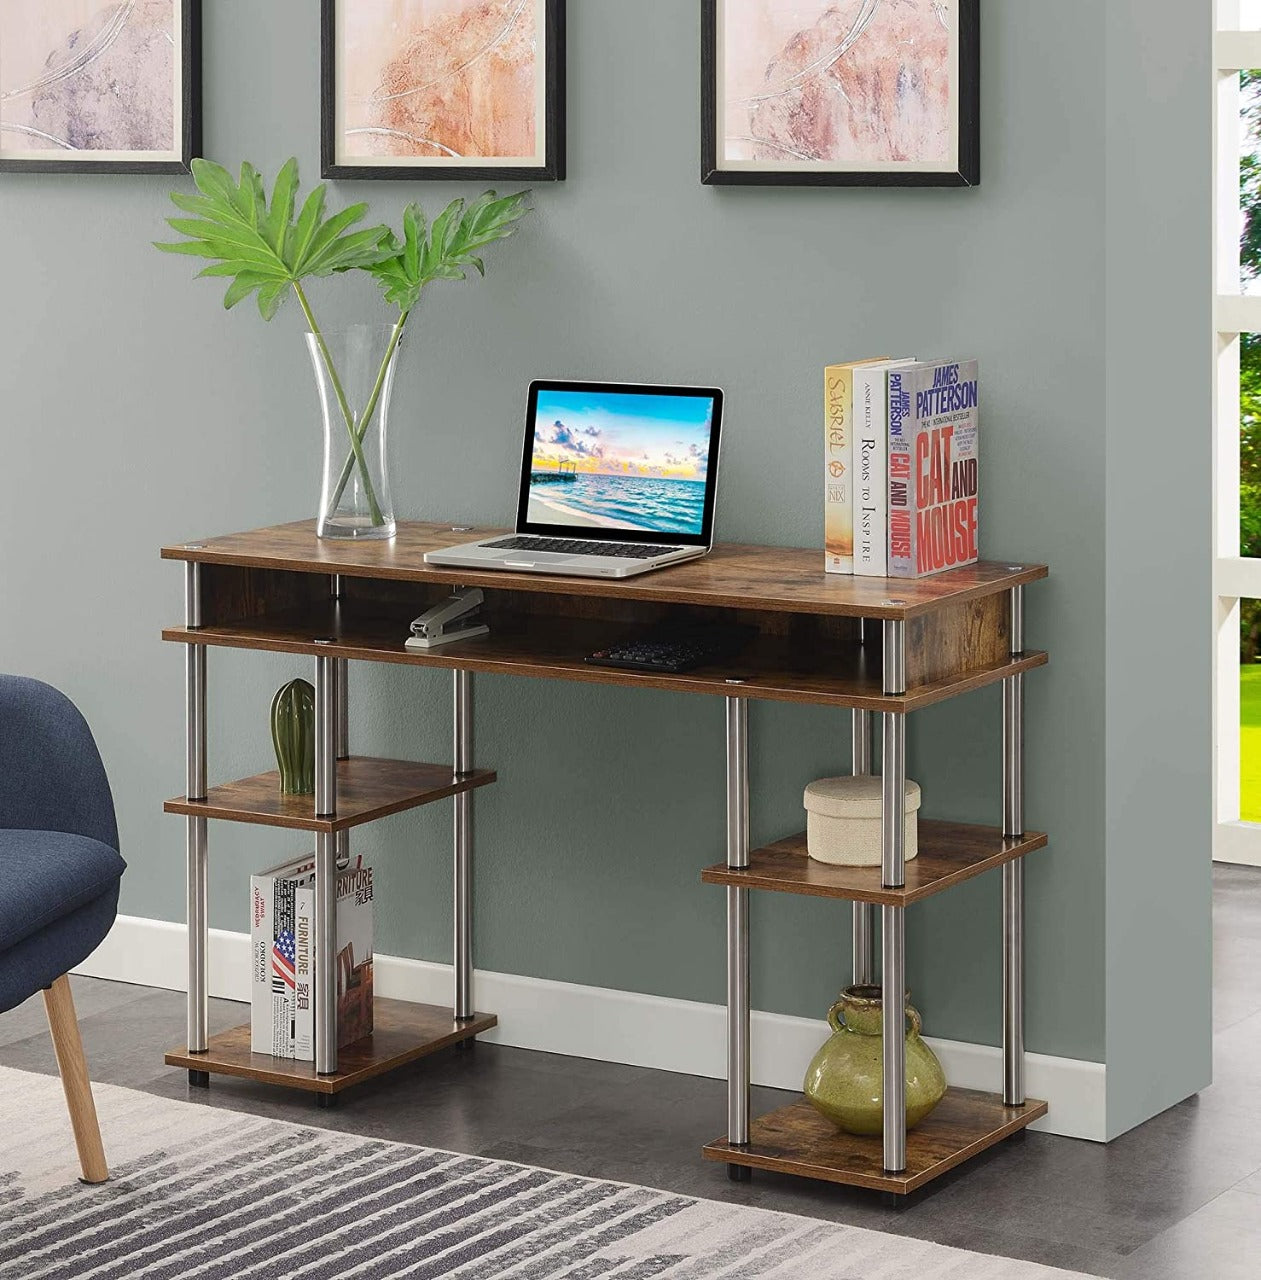 300+ Modern Study Table Designs For Home - Pepperfry